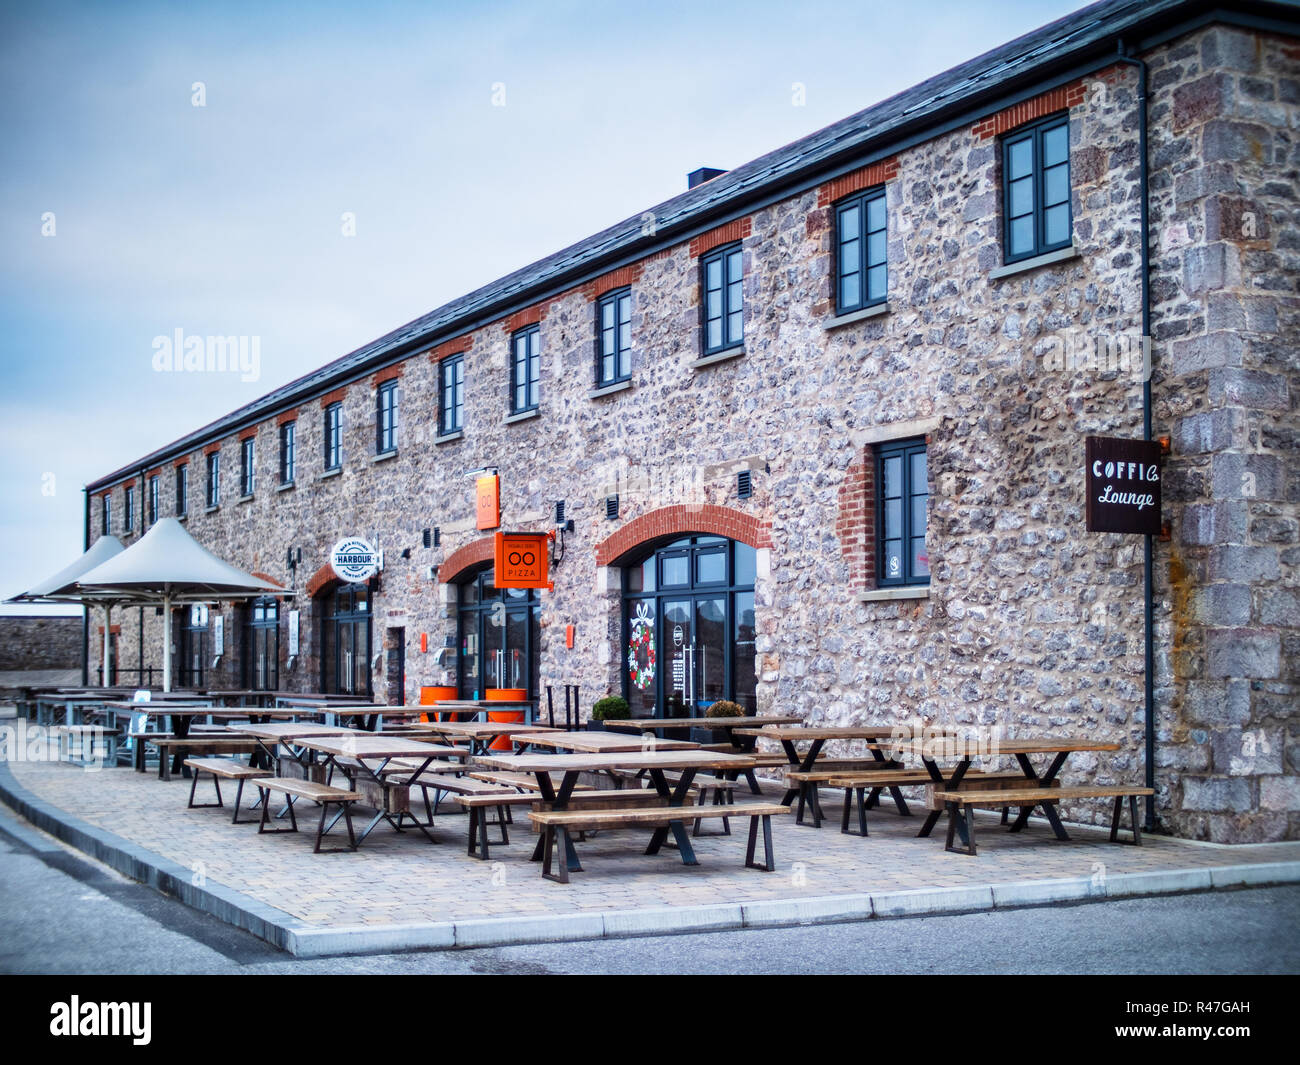 The Jennings Building development Porthcawl. The Jennings Building, built in 1832, is a grade II listed warehouse building, redeveloped 2017. Stock Photo